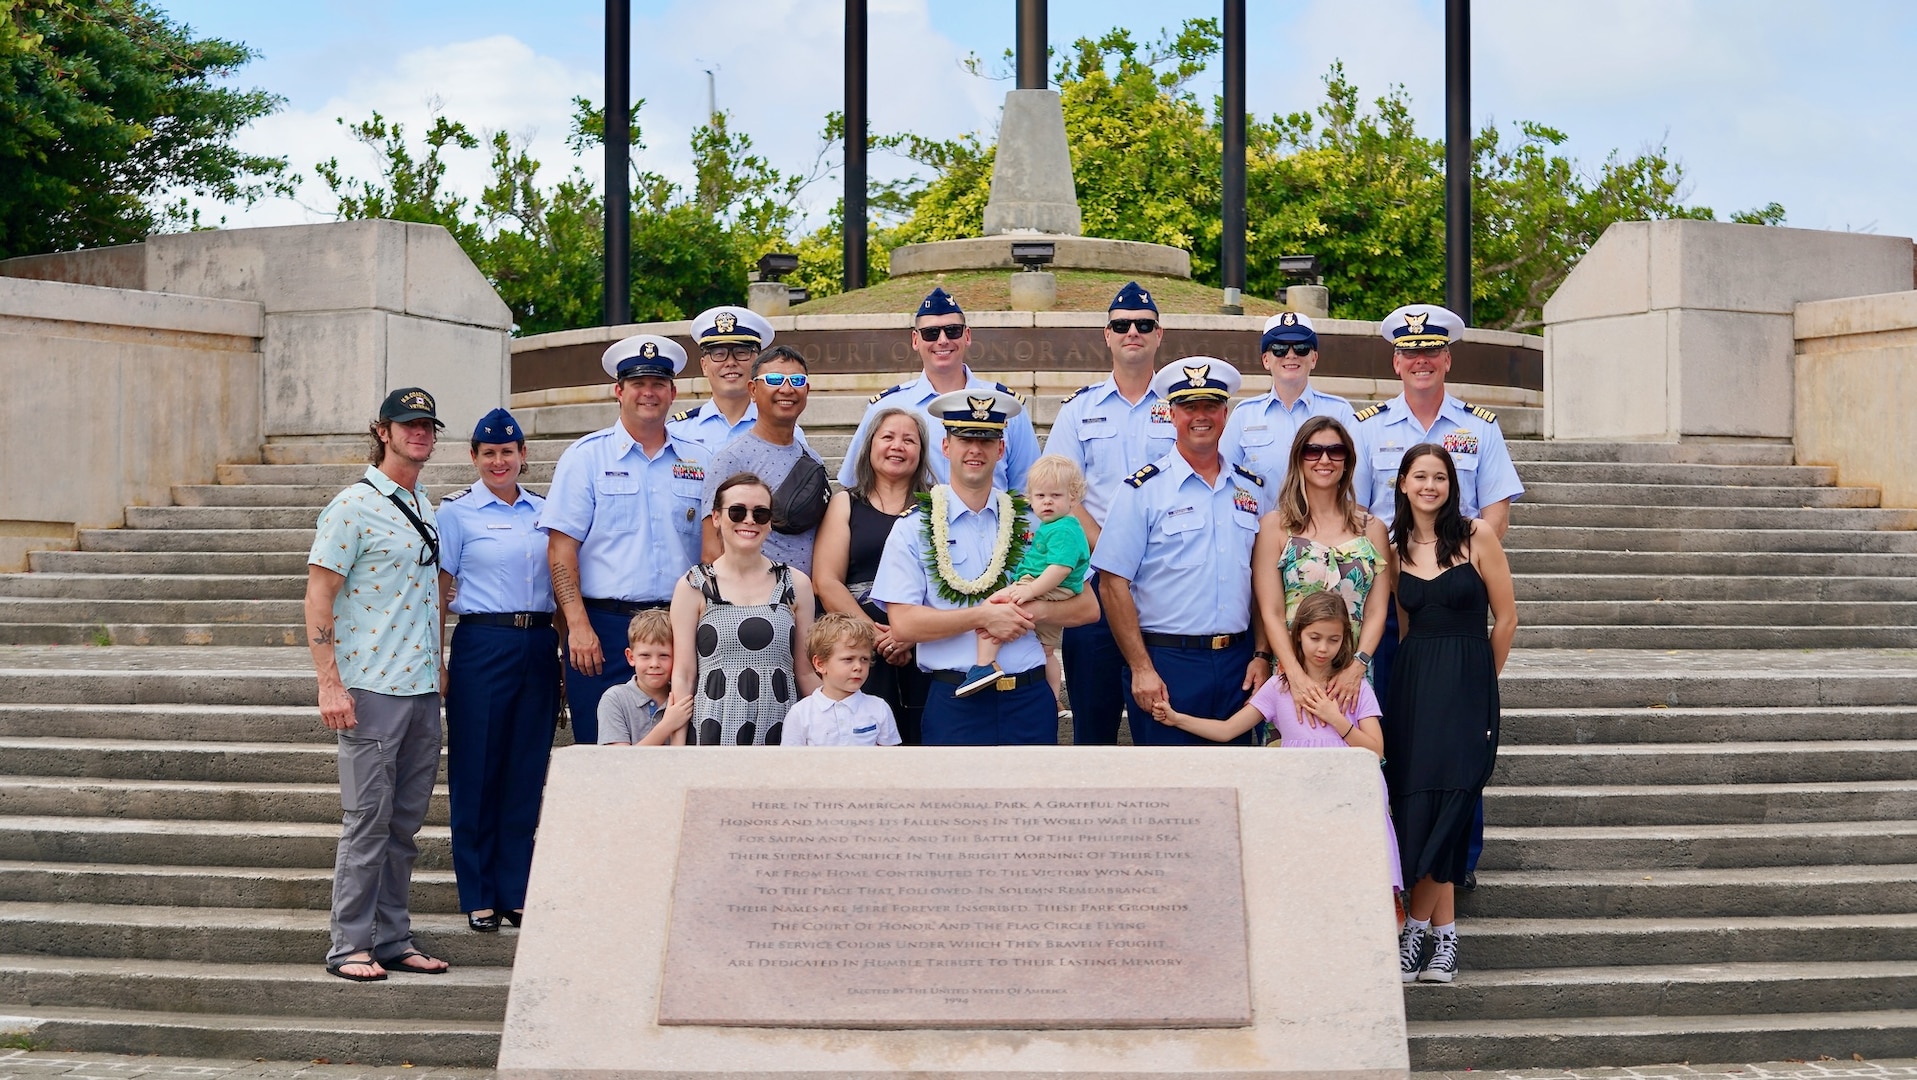 Lt. Justin Miller, commanding officer of Marine Safety Unit Saipan, and assembled members, friends, and family stand for a photo following a ceremony to formally establish MSU Saipan in Garapan at the American Memorial Park on April 5, 2024. This significant achievement marks a milestone in leadership evolution and responsibility expansion within the U.S. Coast Guard, reflecting steadfast commitment to serving the people of Saipan and the Commonwealth of the Northern Marianas Islands (CNMI) with unparalleled dedication and excellence. The change is part of an initiative to provide junior officers with increased command opportunities, fostering professional growth and leadership development within the ranks. Eighteen marine safety detachments are converting to marine safety units. (U.S. Coast Guard photo by Chief Warrant Officer Sara Muir)